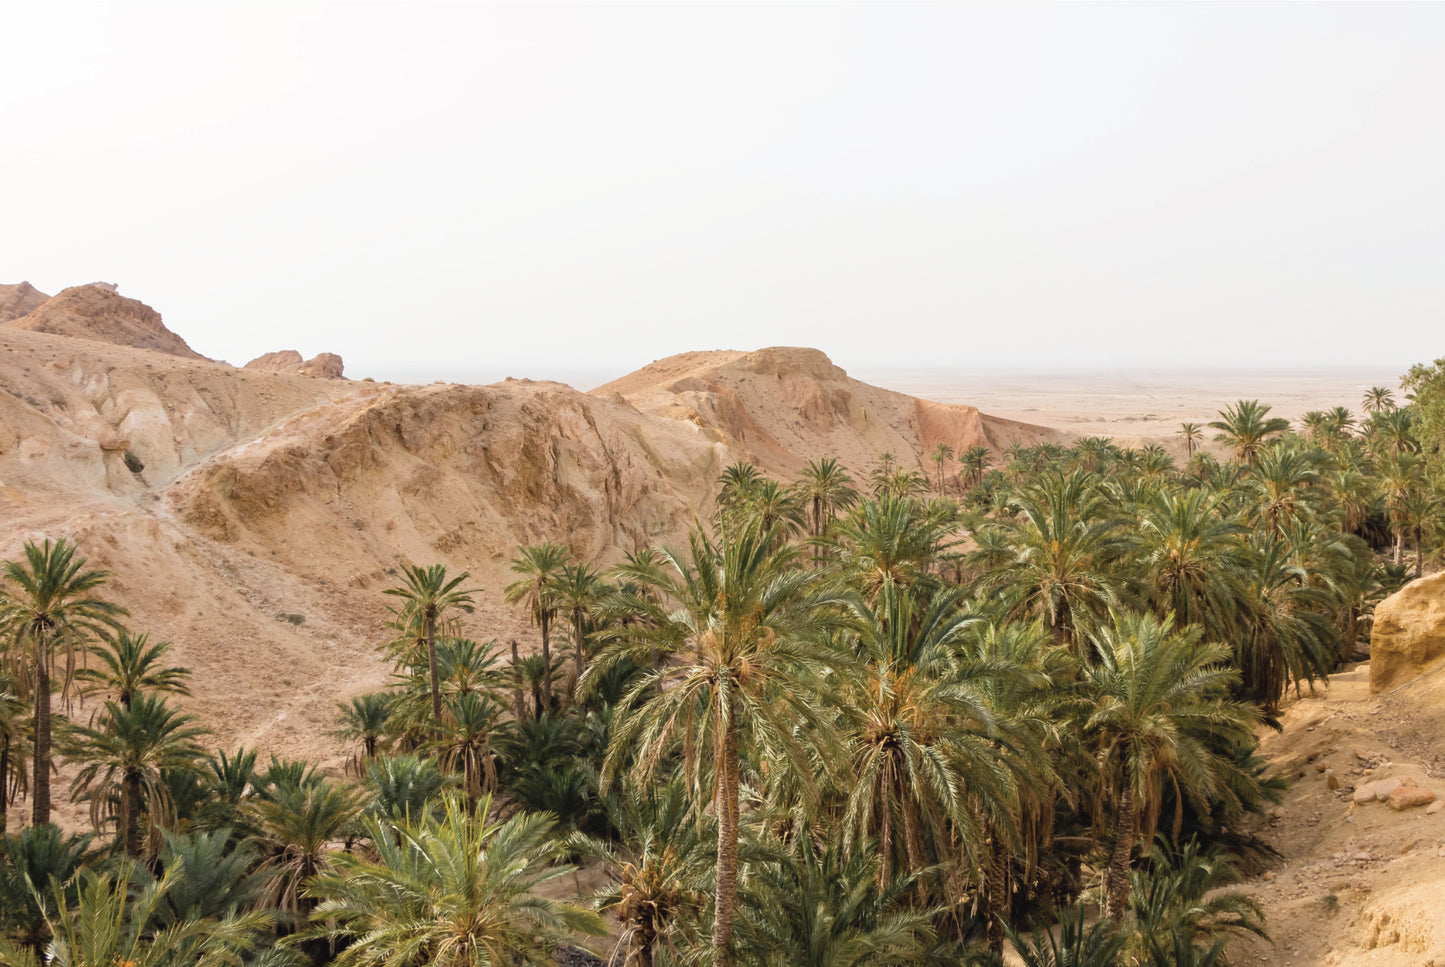 Mountain top scenery of desert mountains and palm trees in Tunisia